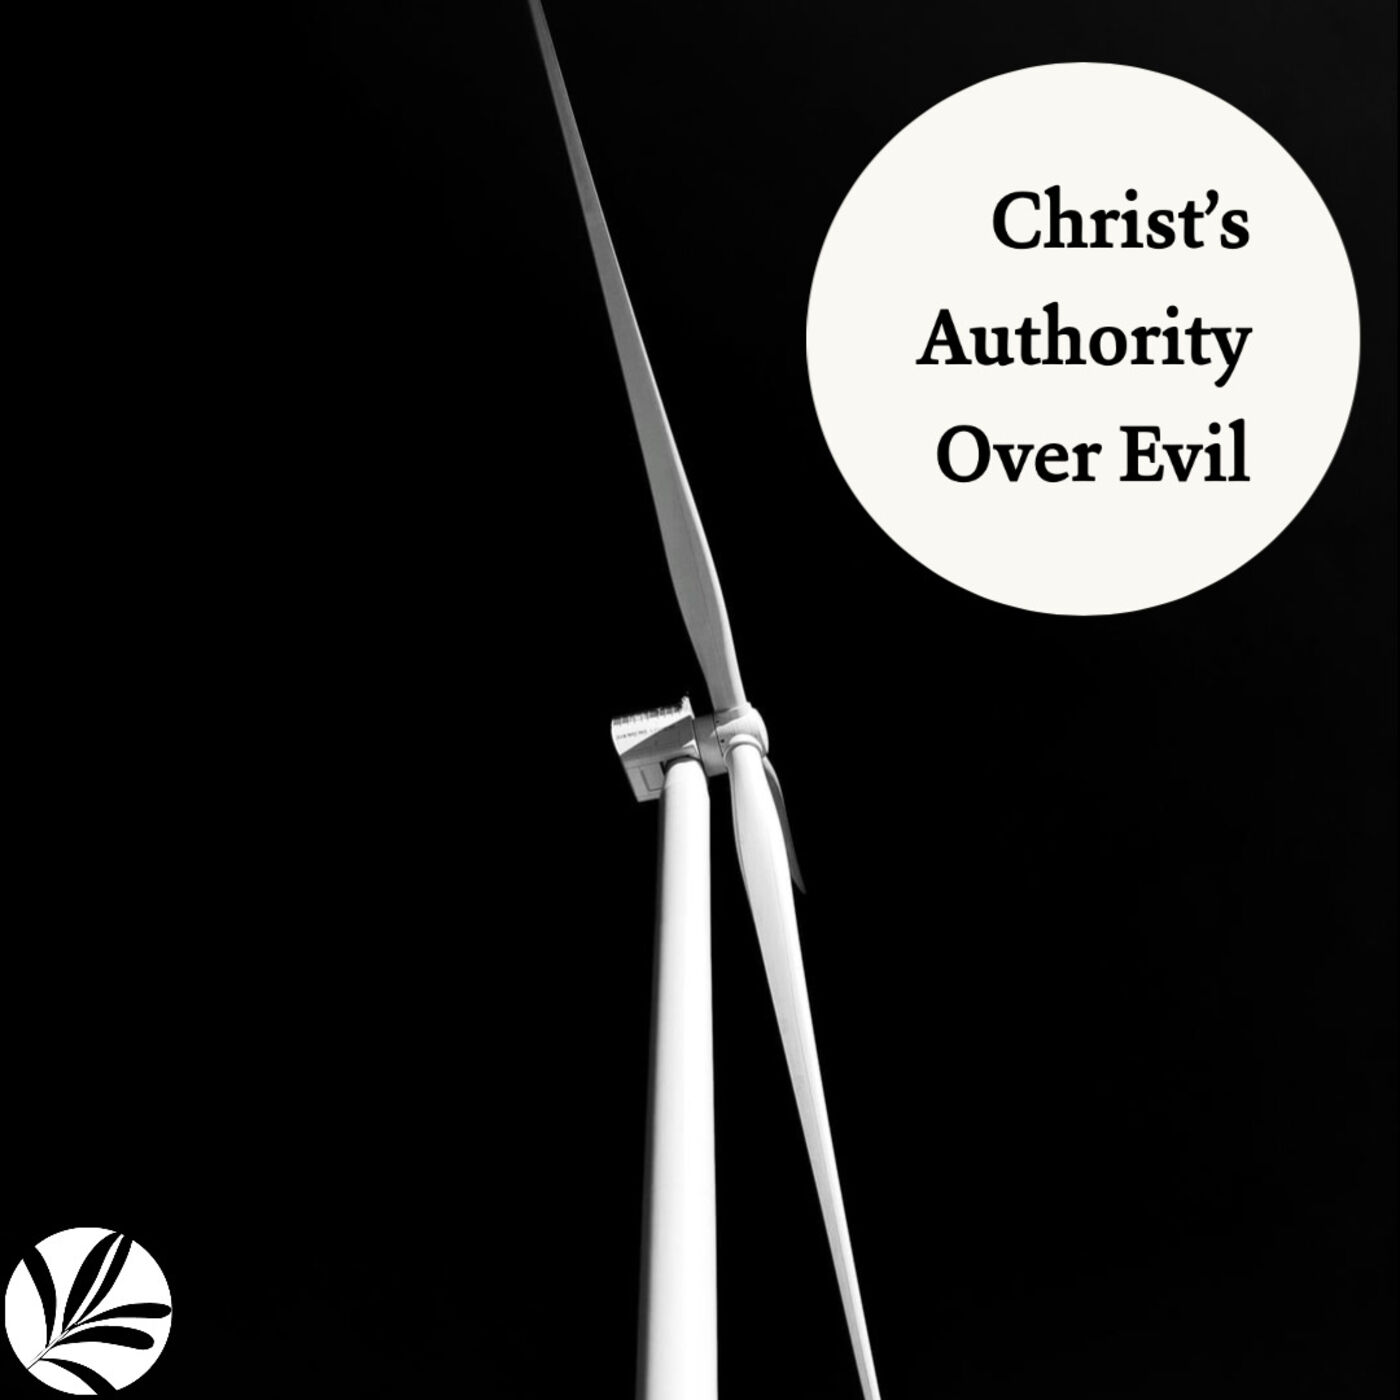 Christ's Authority Over Evil